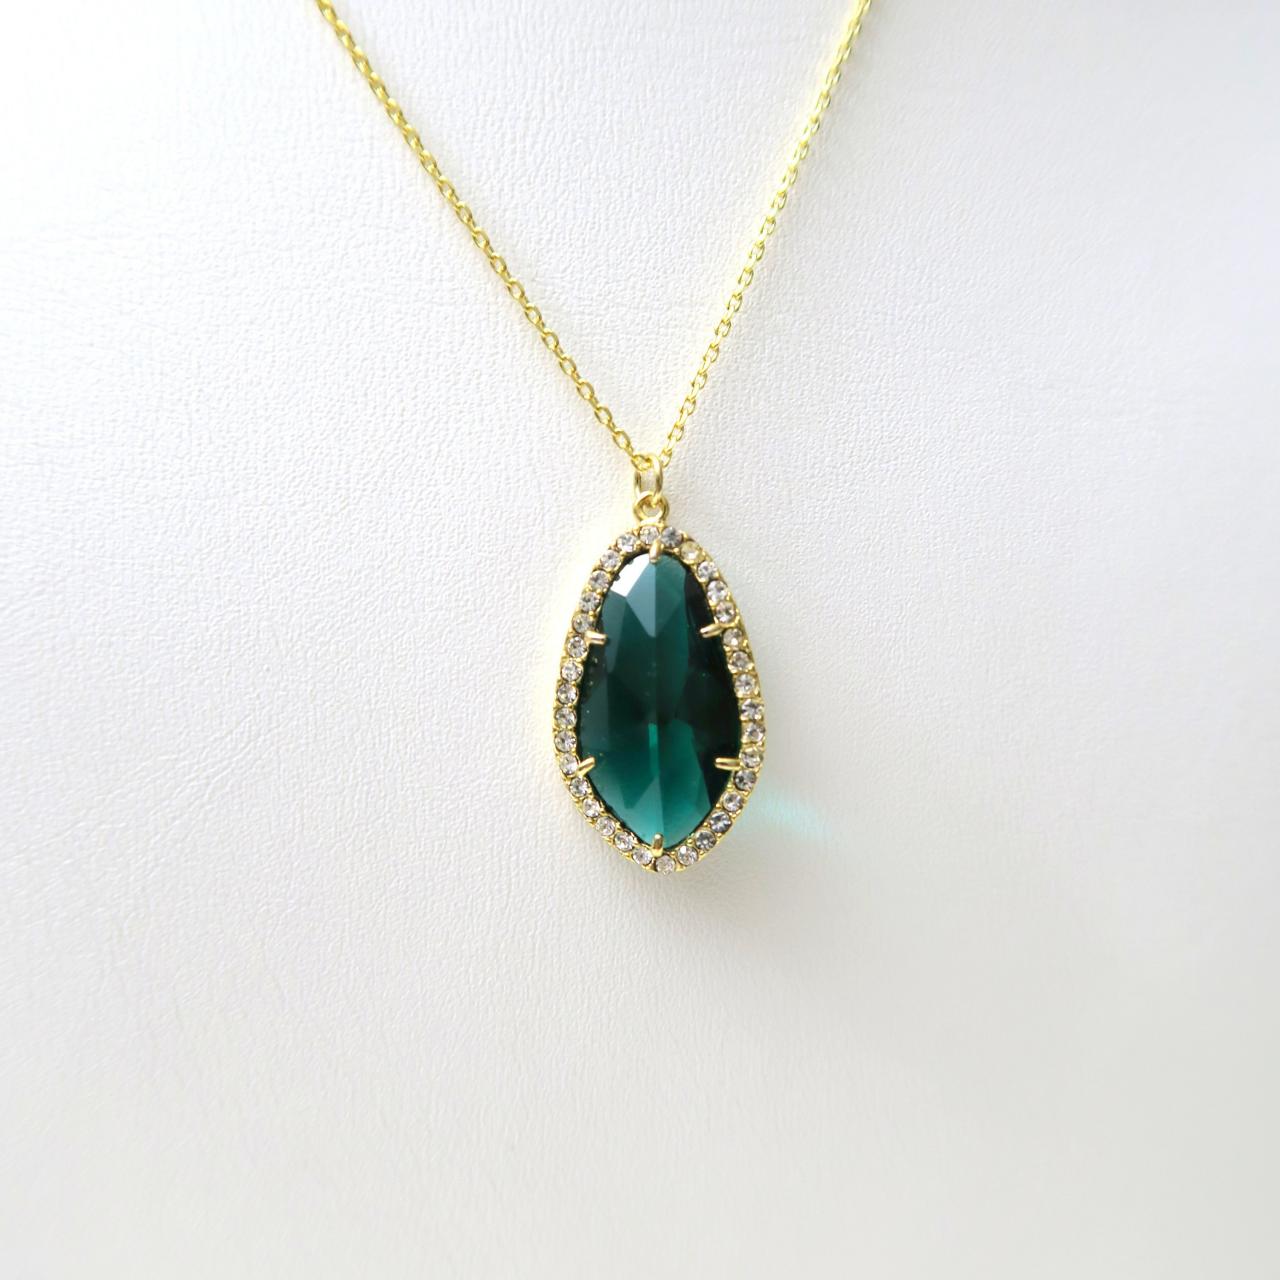 Emerald Green Teardrop Necklace Crystal Charm Necklace Green Wedding Bridal Necklace Bridesmaids Gift Birthday Gift Valentine's Day